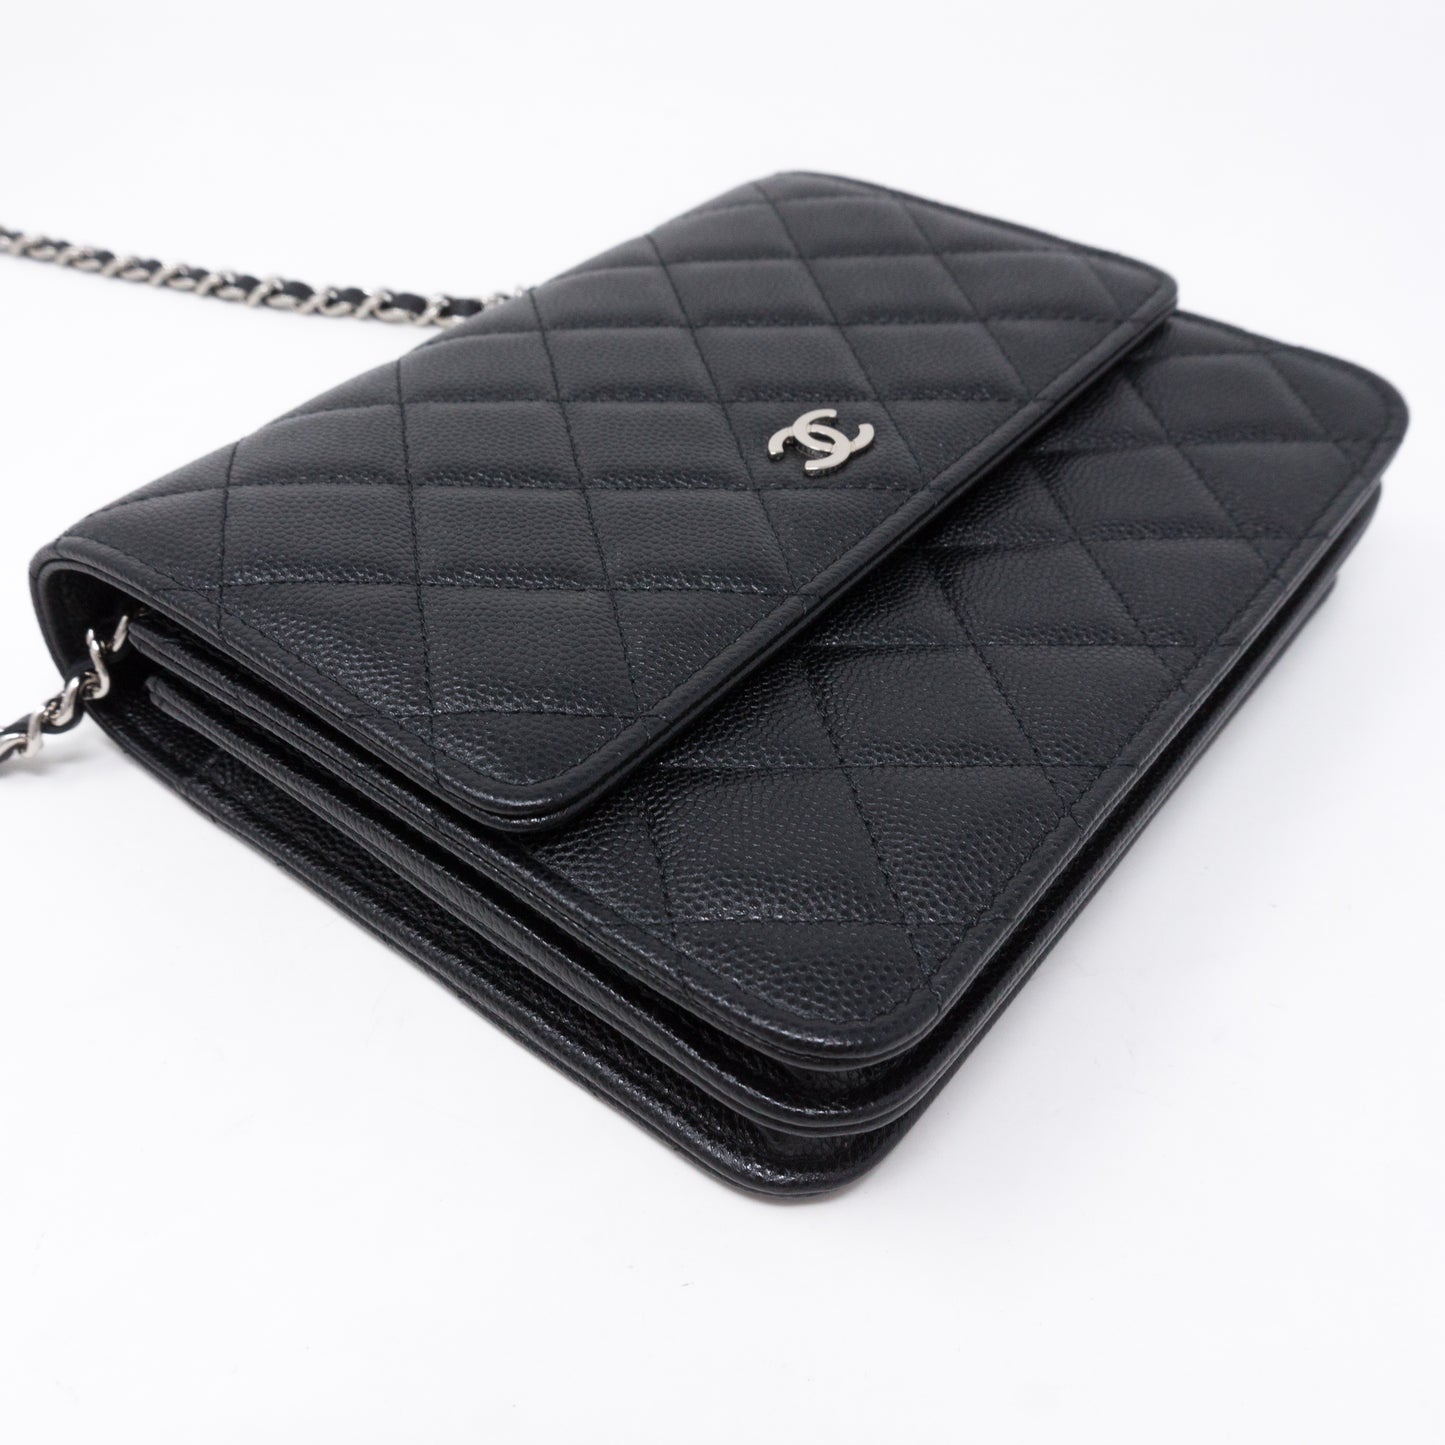 Square Wallet on Chain Black Caviar Leather